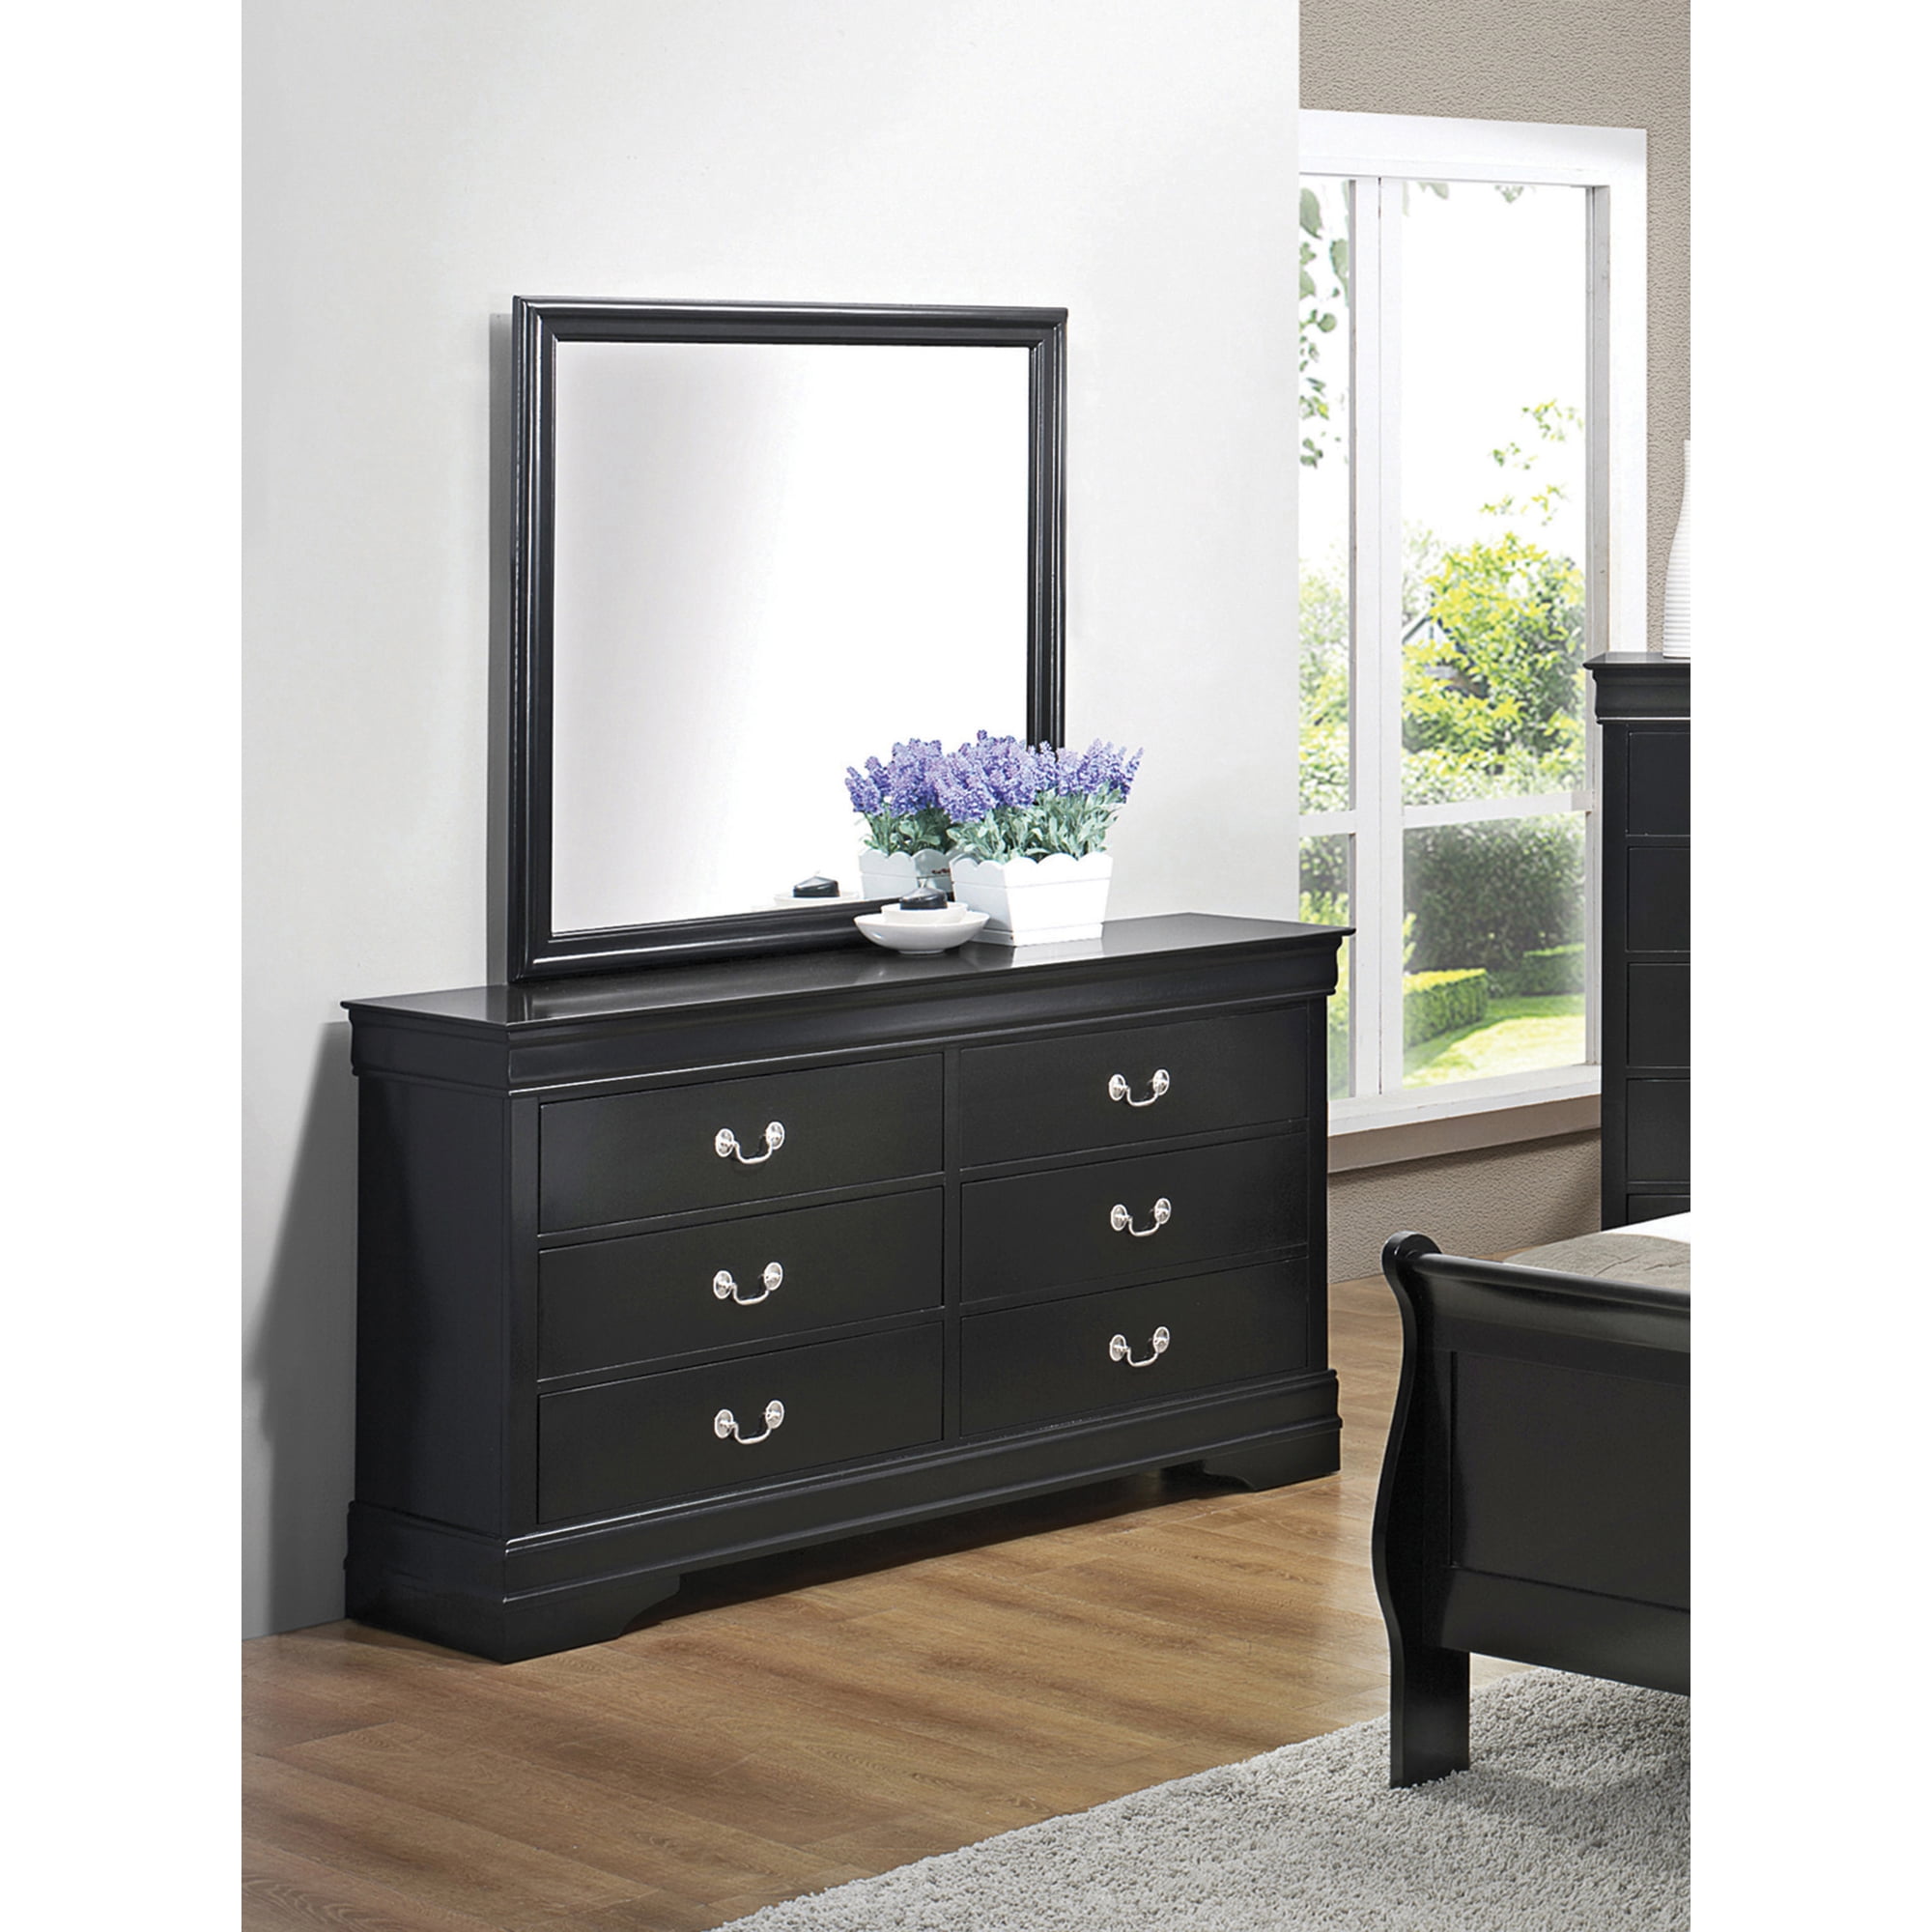 Acme Furniture Louis Philippe 6-Drawers Platinum Dresser 26735 - The Home  Depot